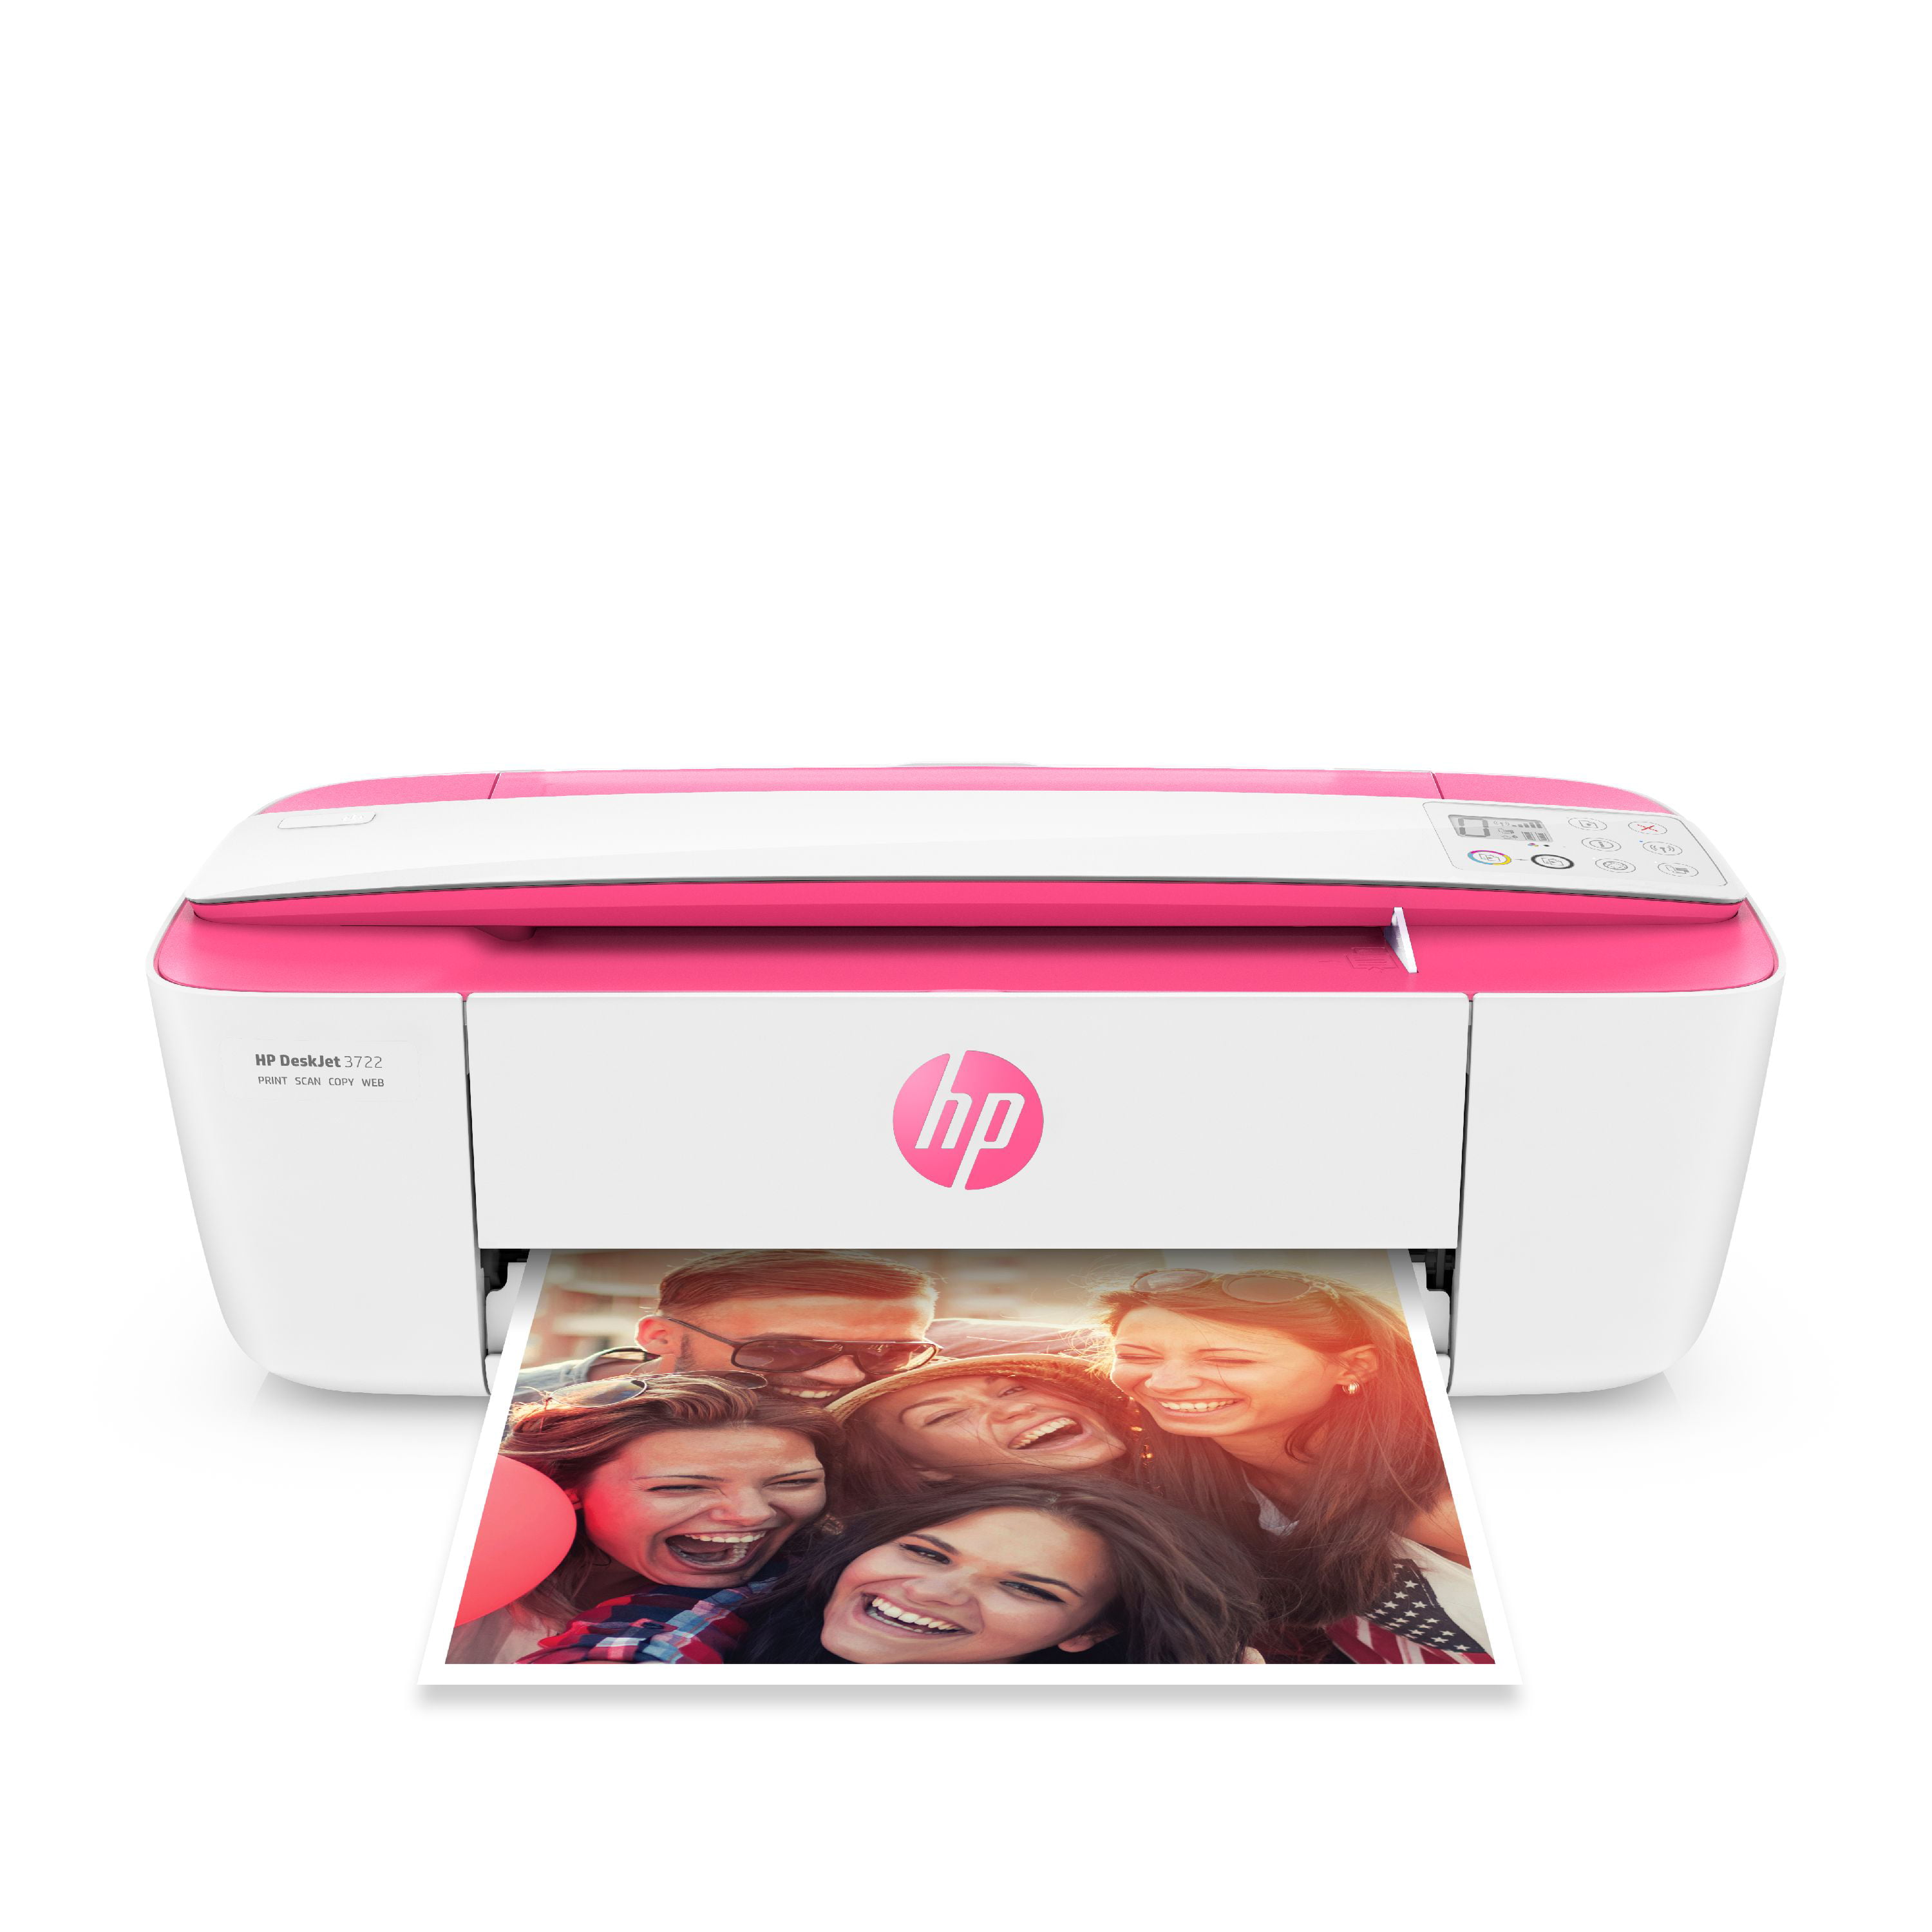 How to COPY, PRINT & SCAN with HP Deskjet 3762 all-in-one Printer review ?  